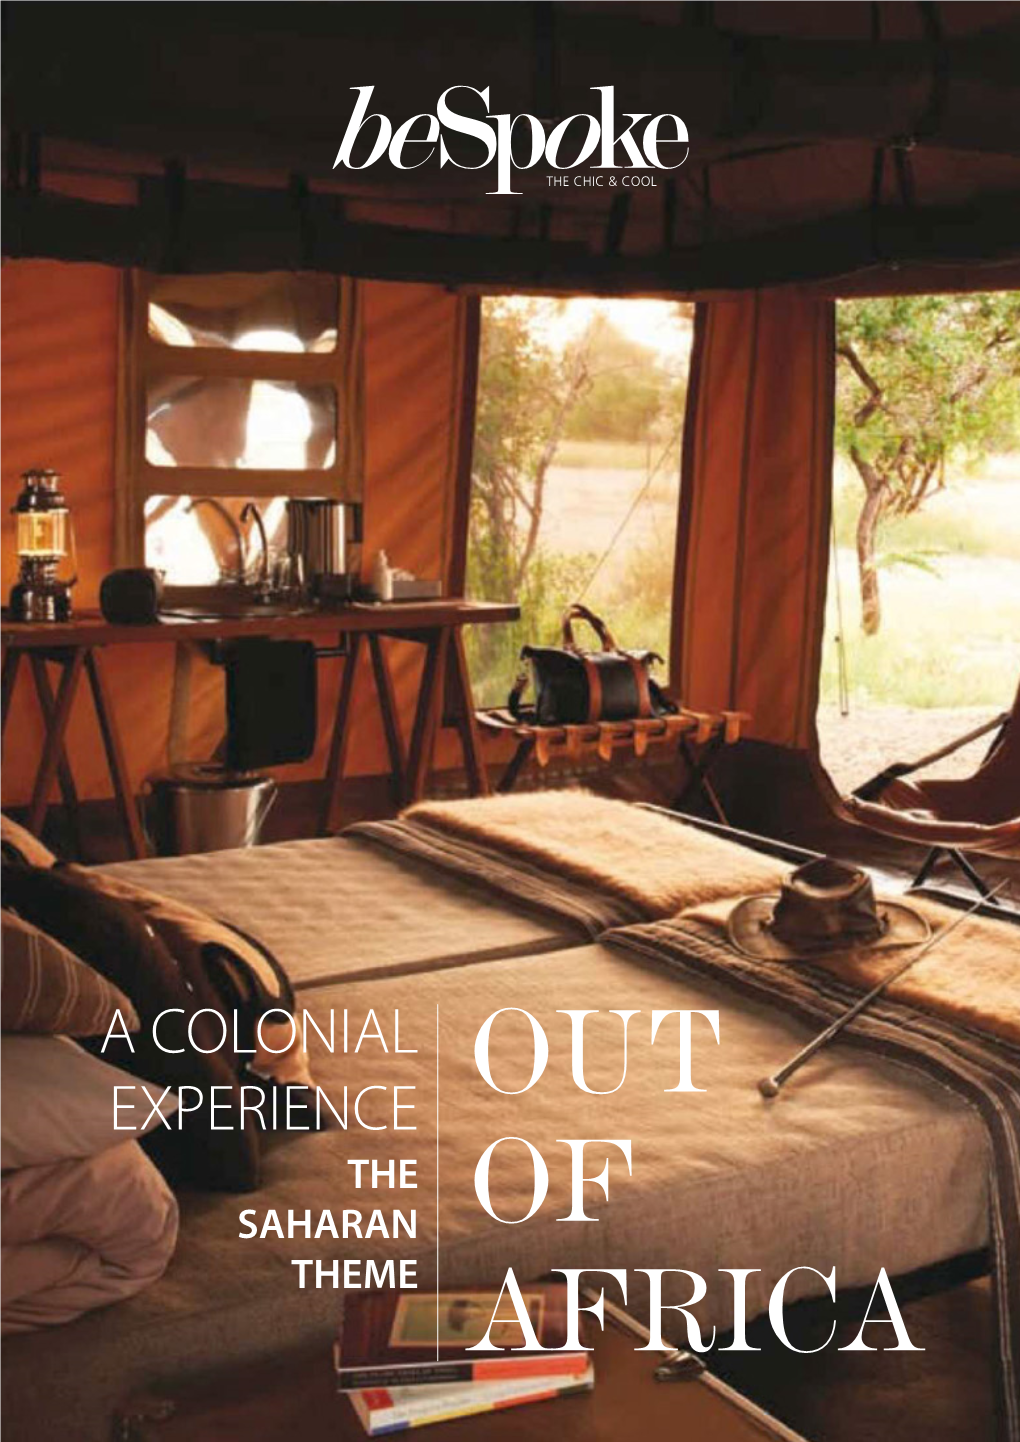 A COLONIAL EXPERIENCE out the SAHARAN of THEME AFRICA “To Really Live